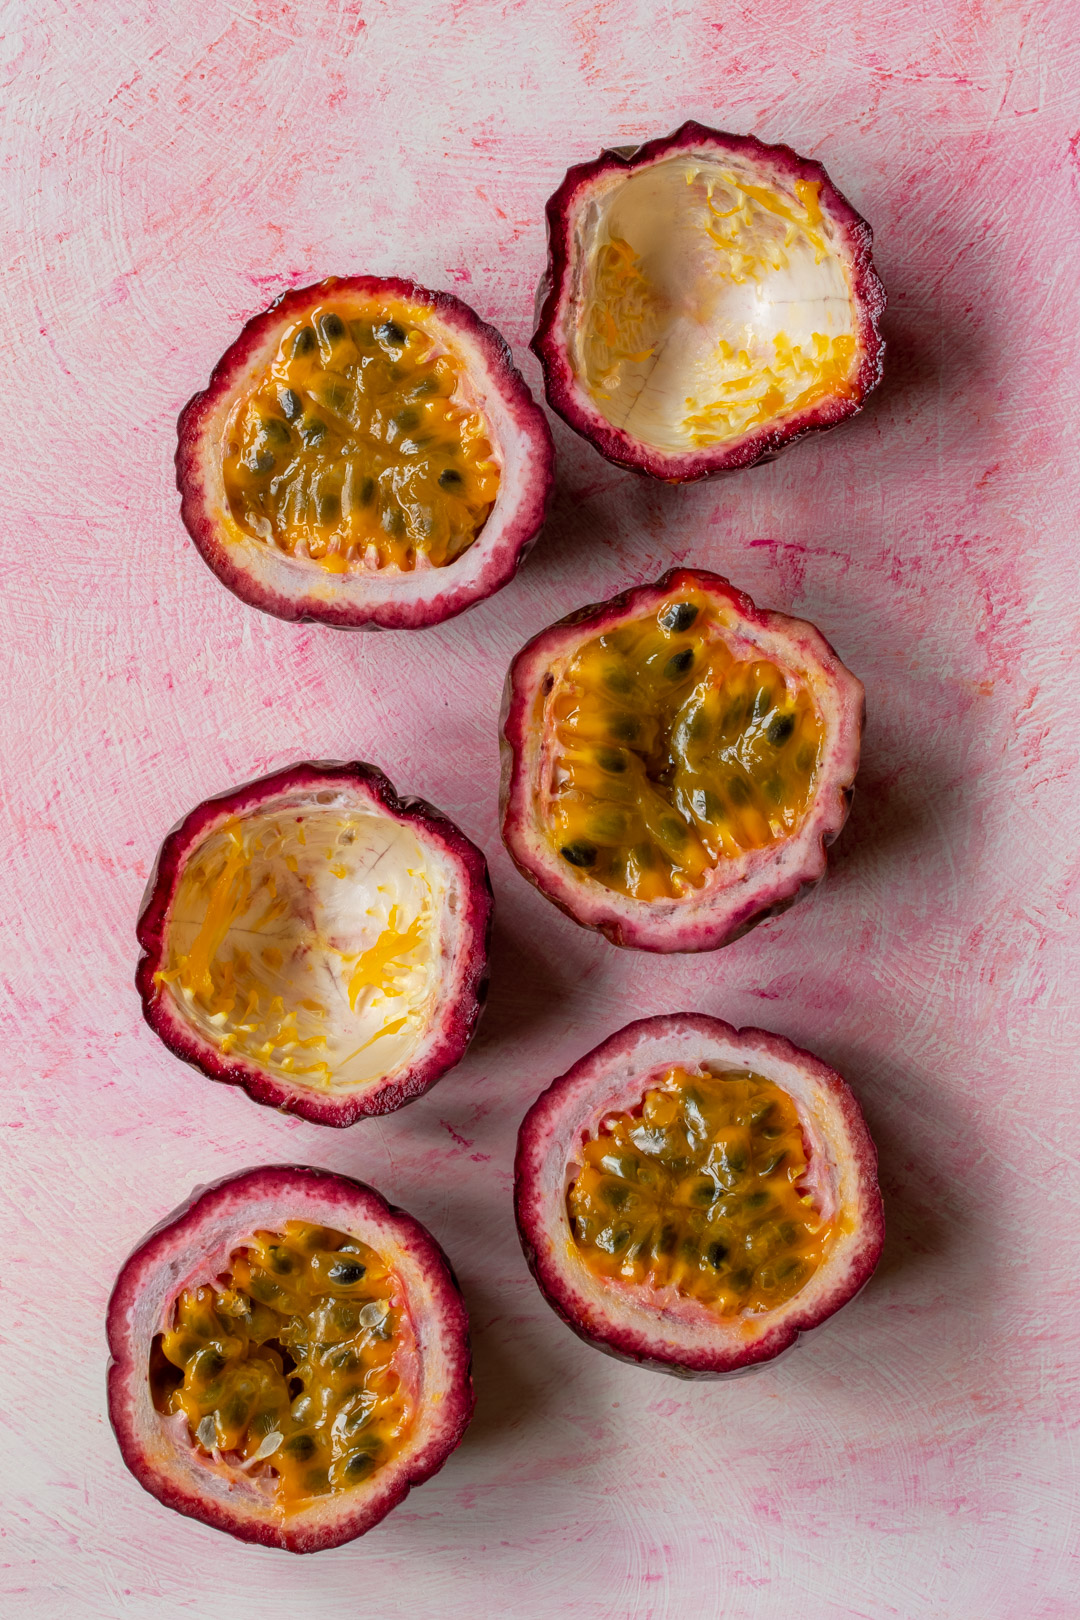 passionfruits for making passionfruit syrup for passionfruit and chocolate lactarts